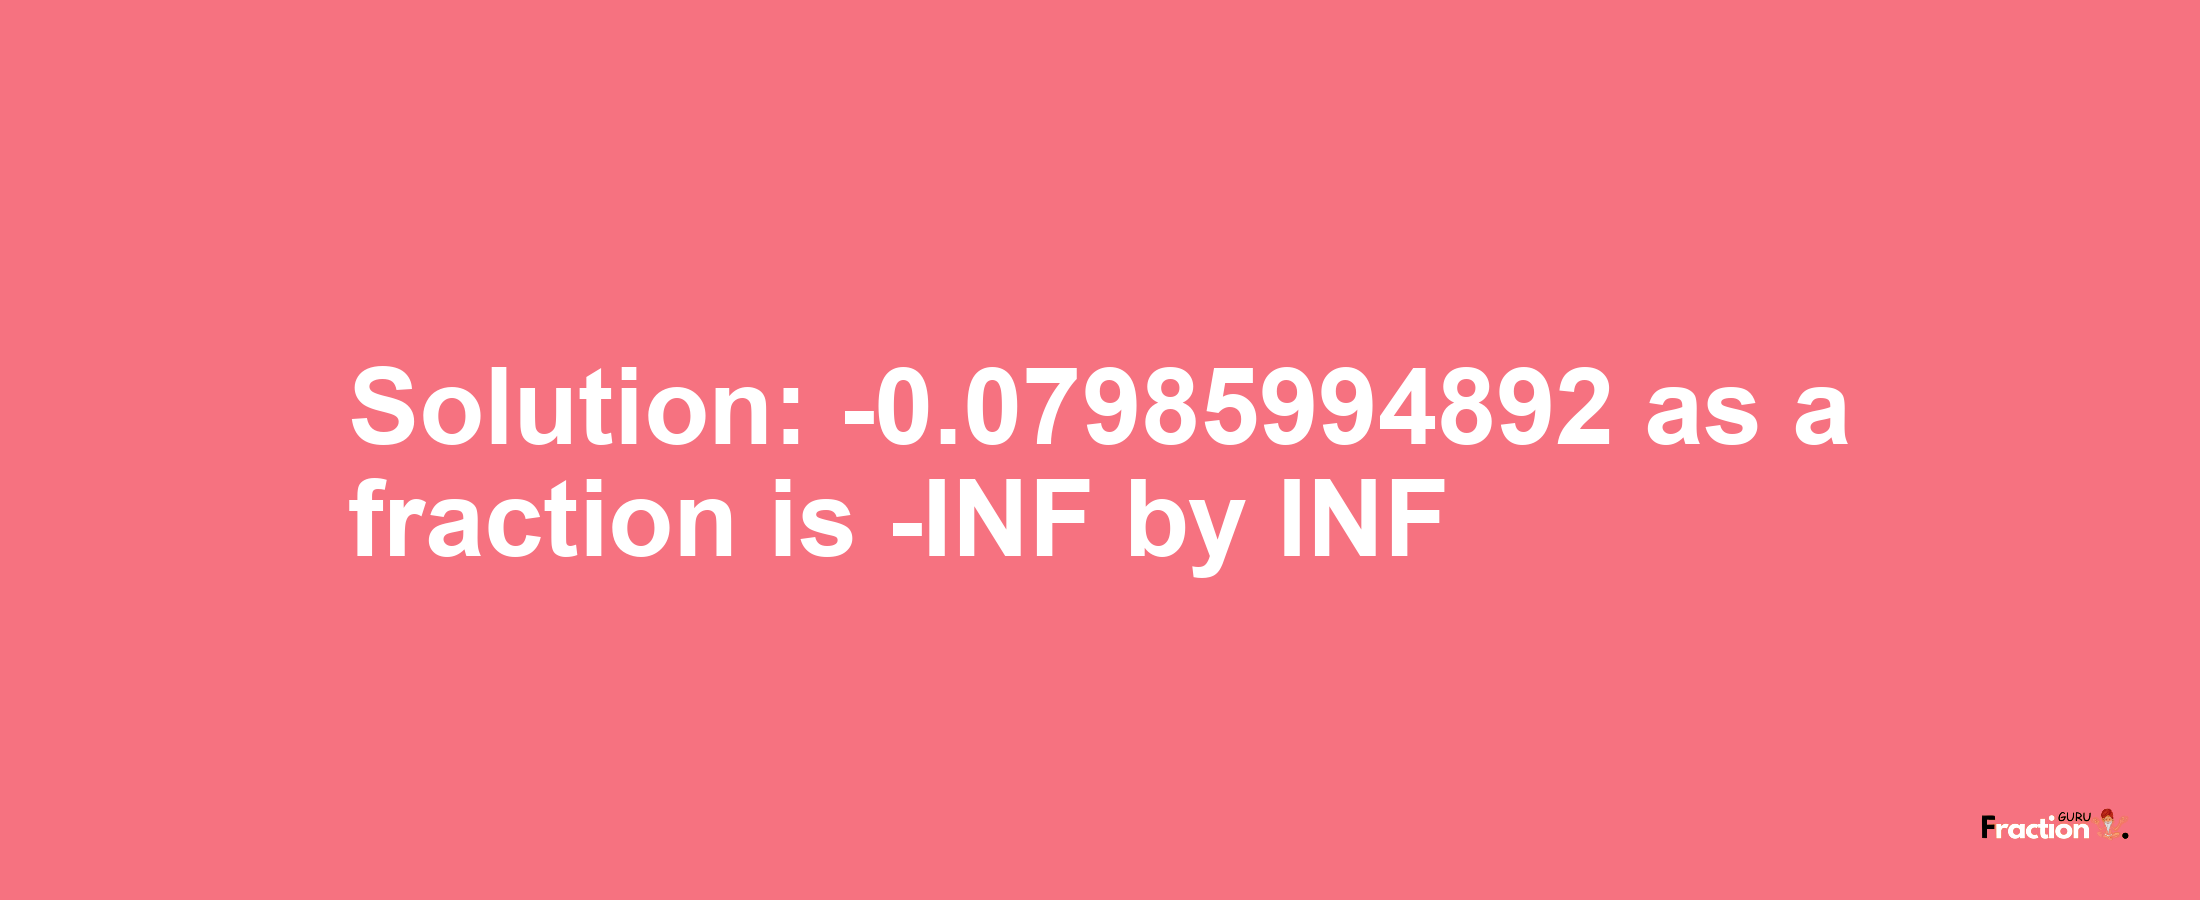 Solution:-0.07985994892 as a fraction is -INF/INF